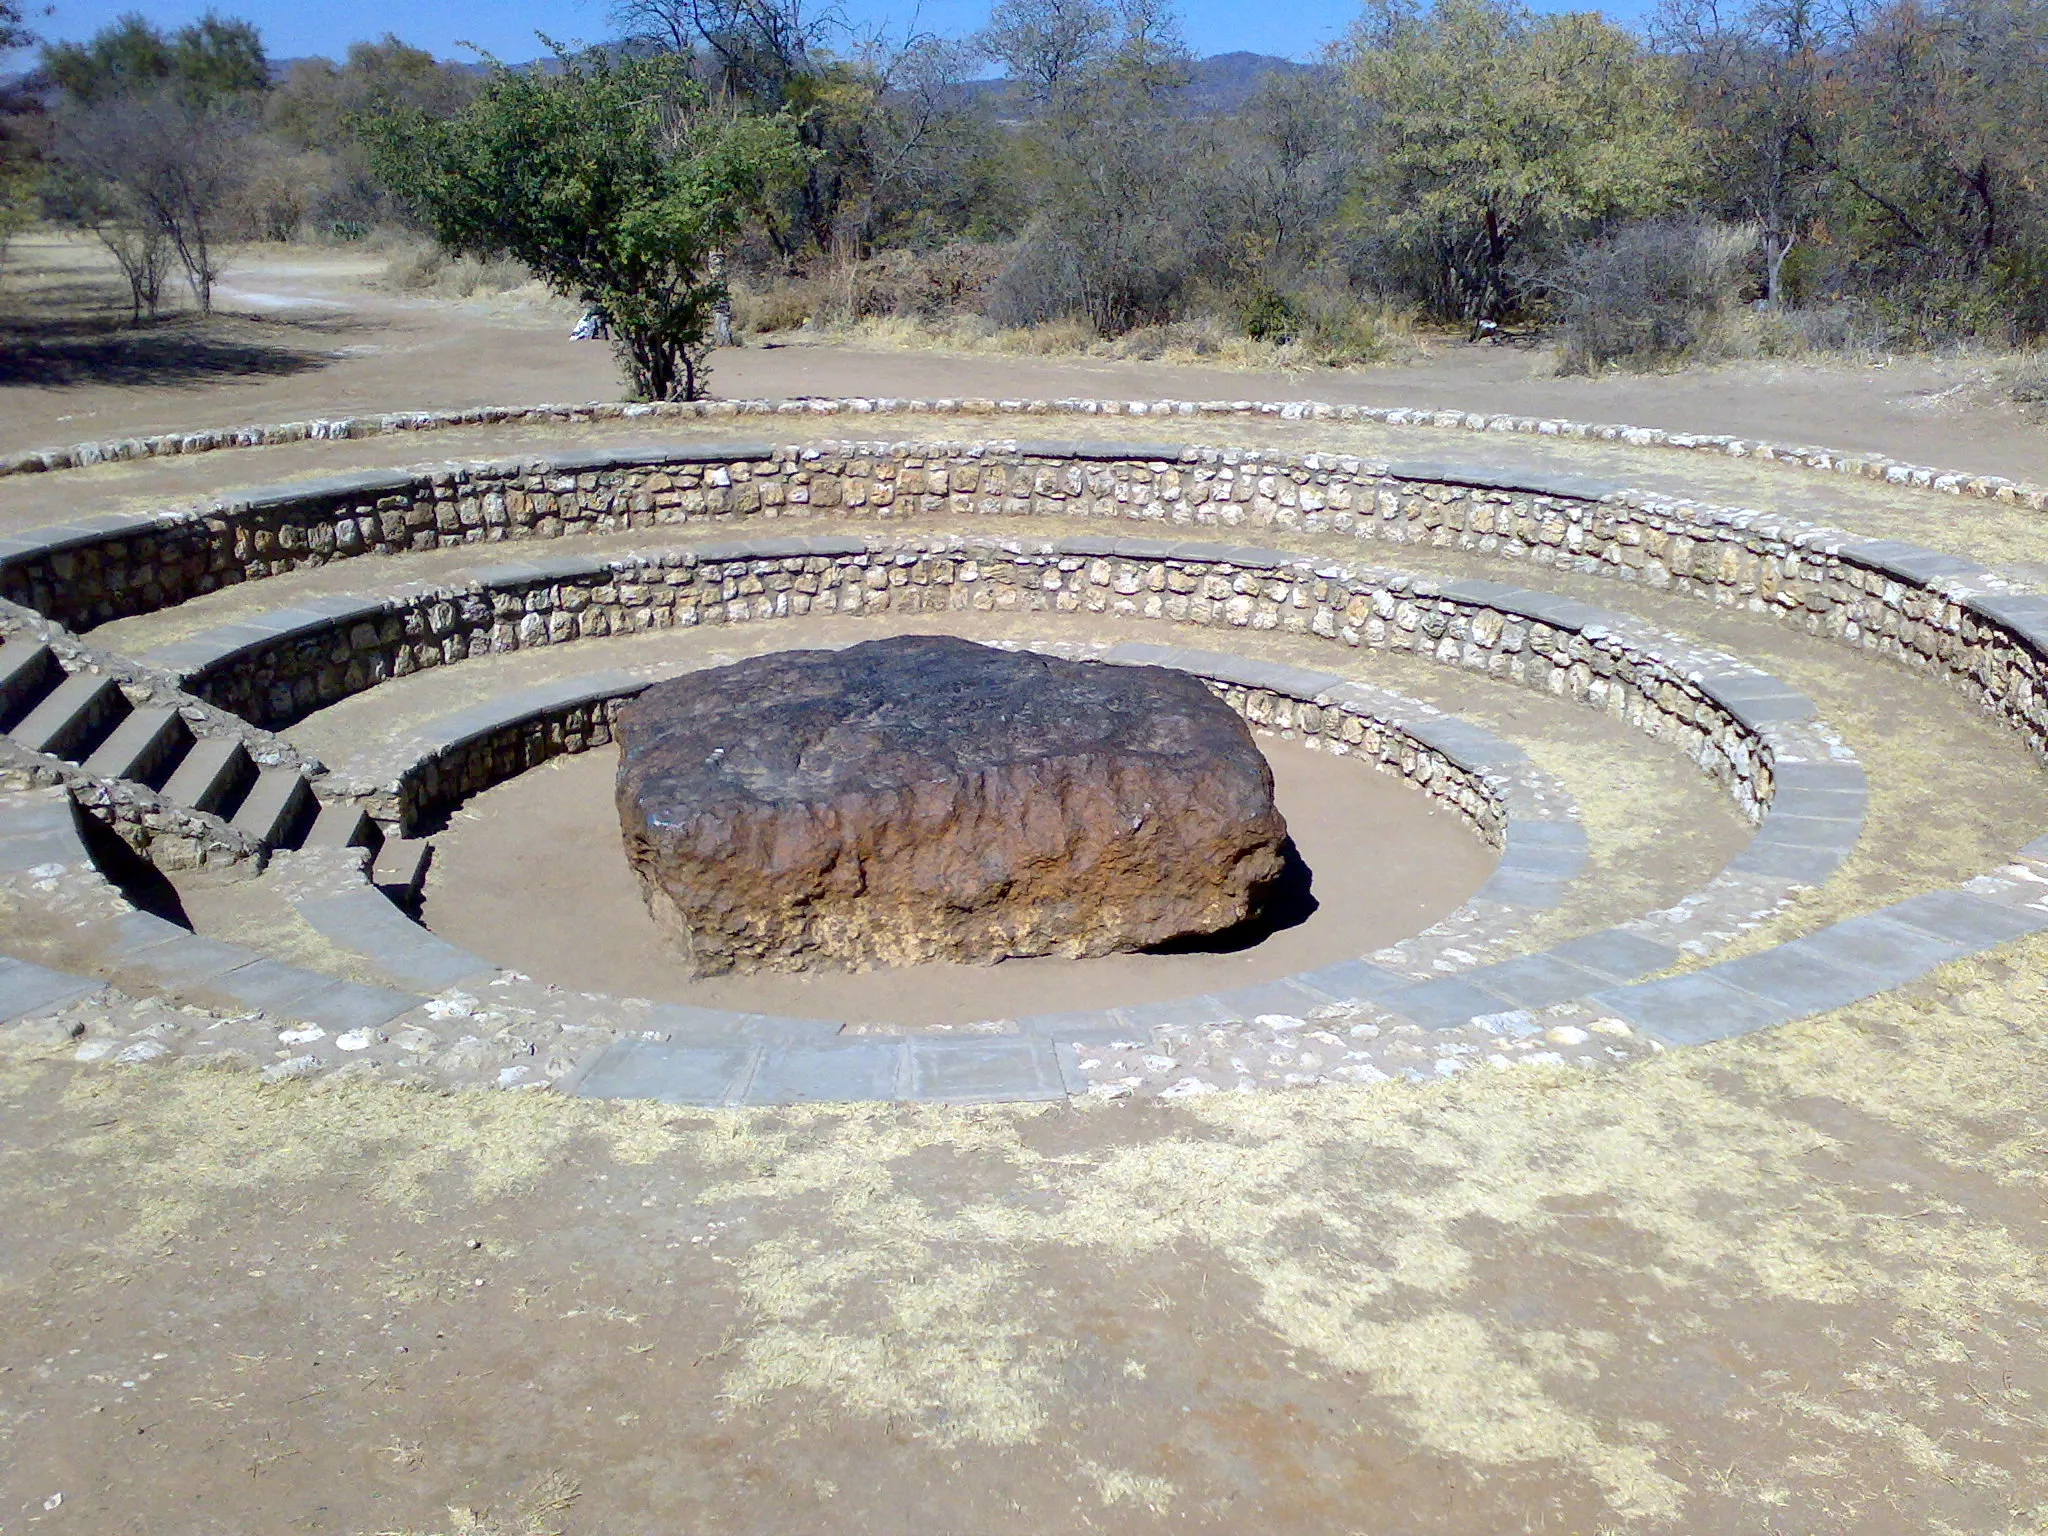 Hoba Meteorite in Namibia, Africa | Nature Reserves - Rated 0.7